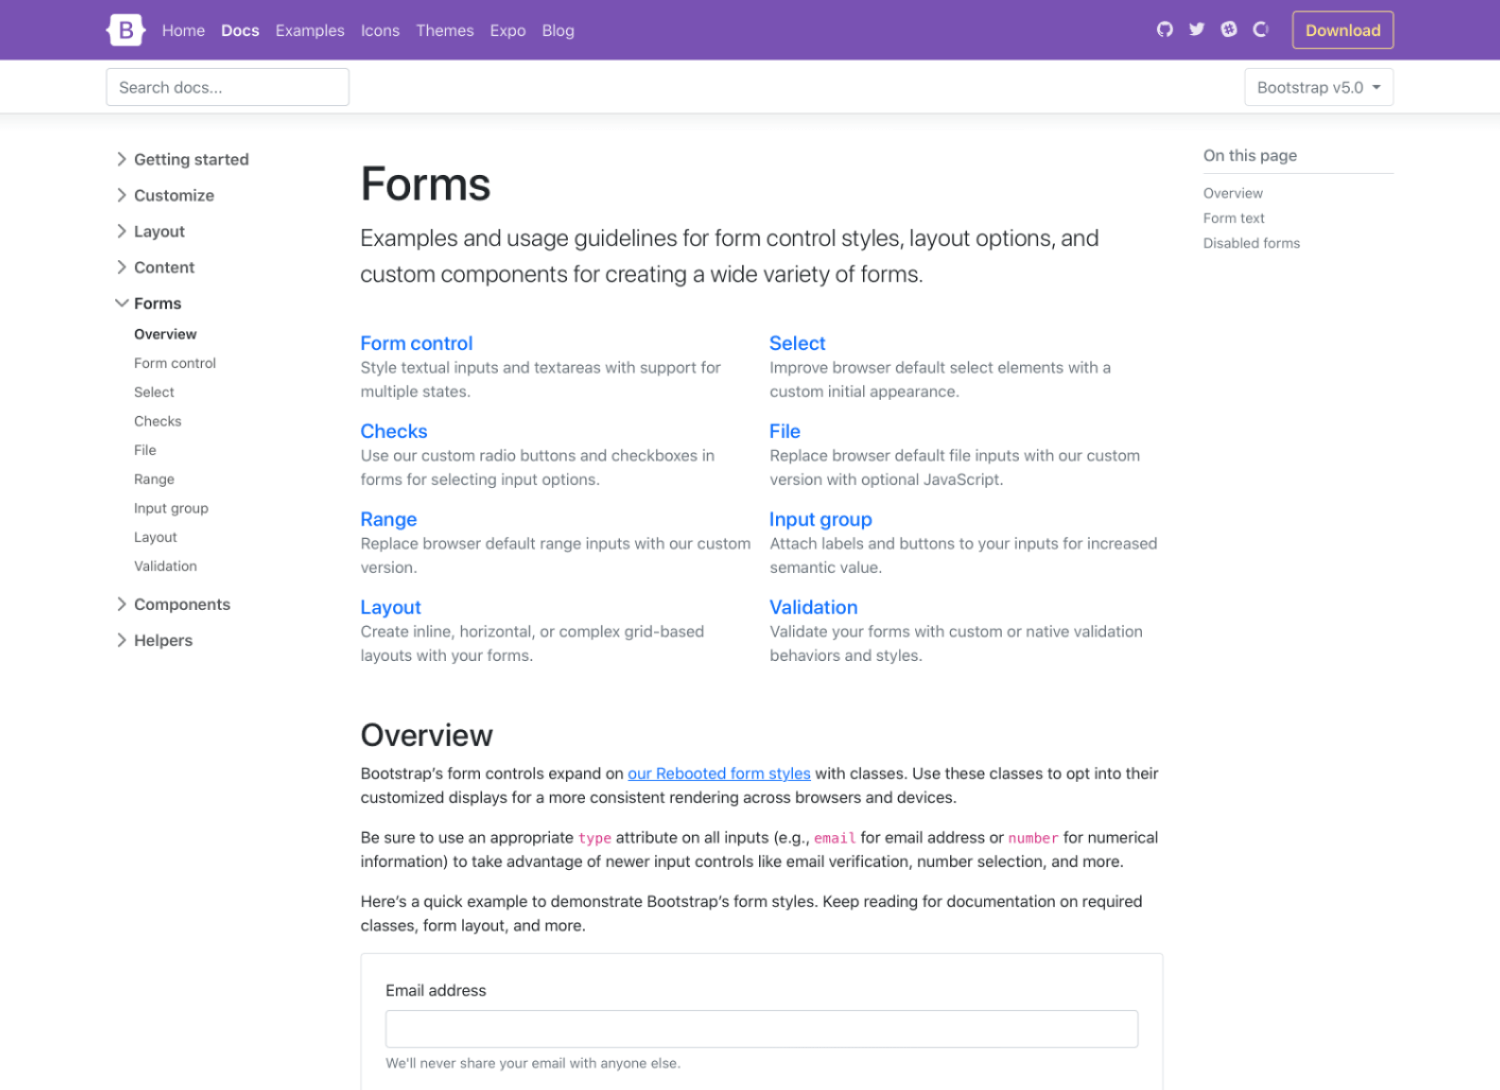 New Bootstrap 5 forms docs